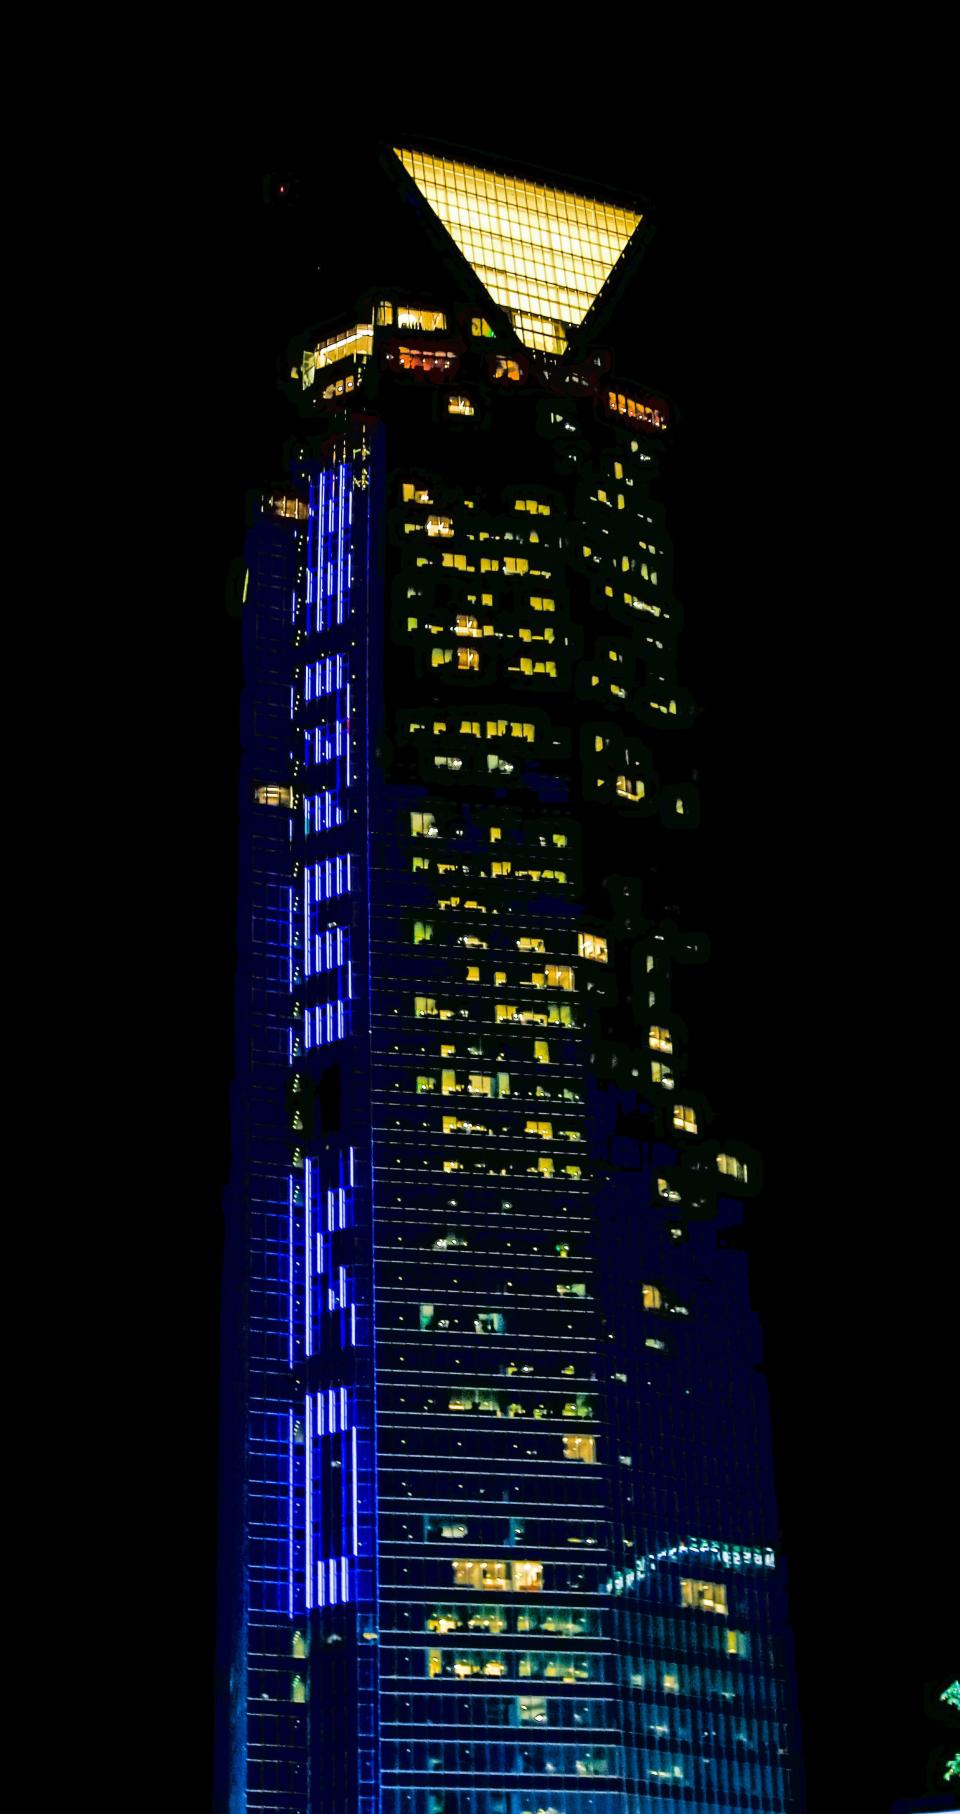 The Devon Tower displays #35 KD in celebration of the Thunder's Kevin Durant receiving the NBA MVP award in 2014.